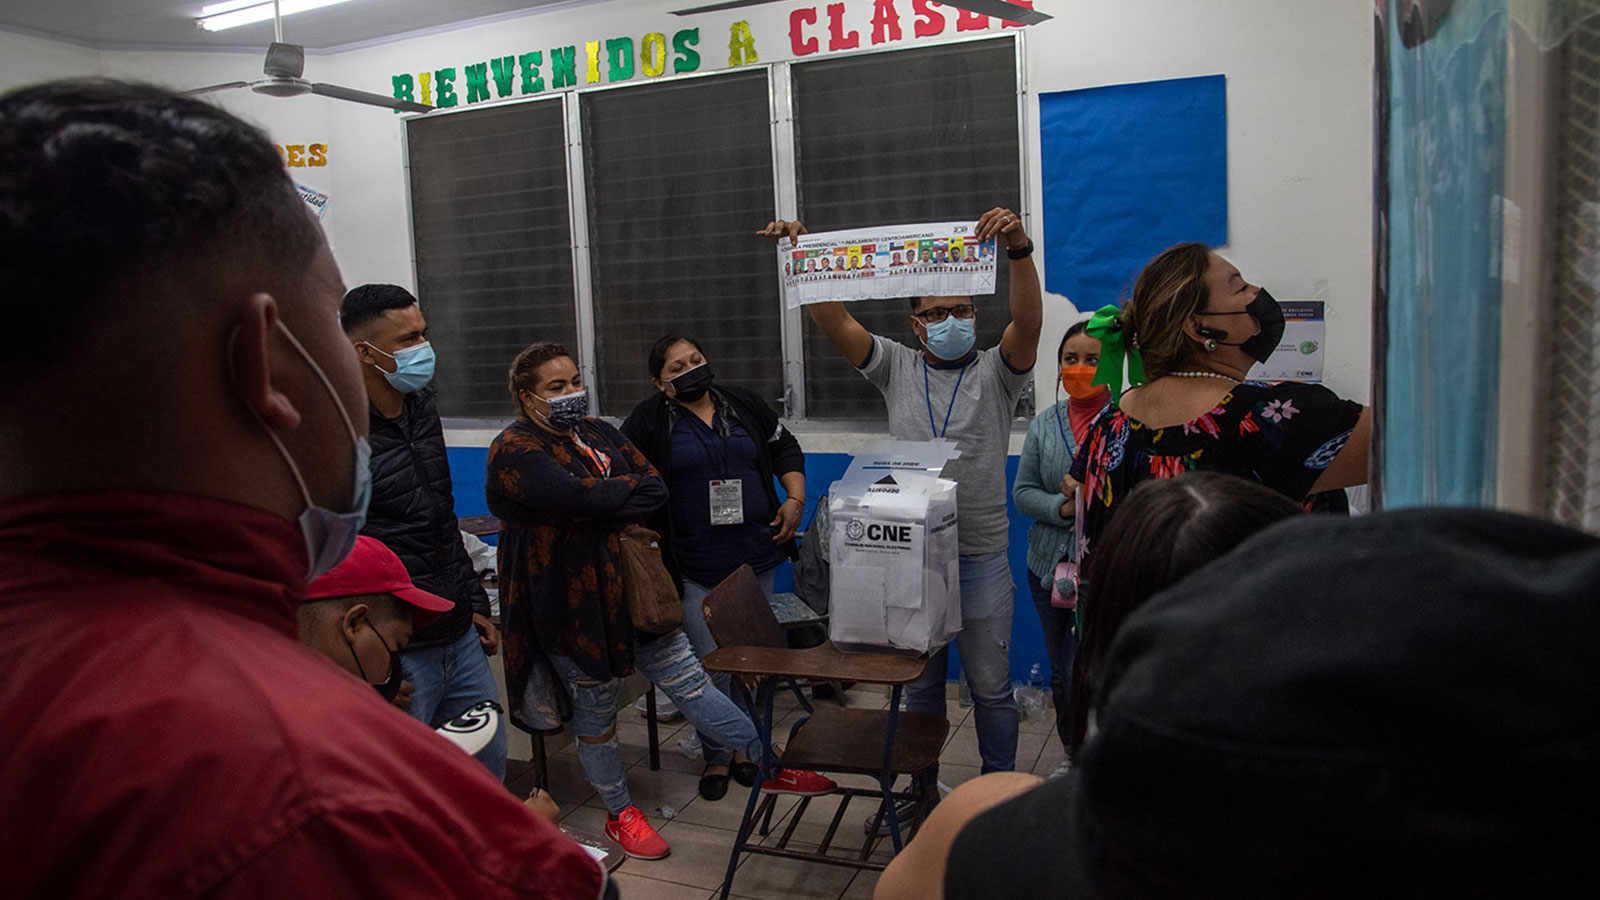 A poll worker displays a finished ballot to voters in Tegucigalpa, Honduras.